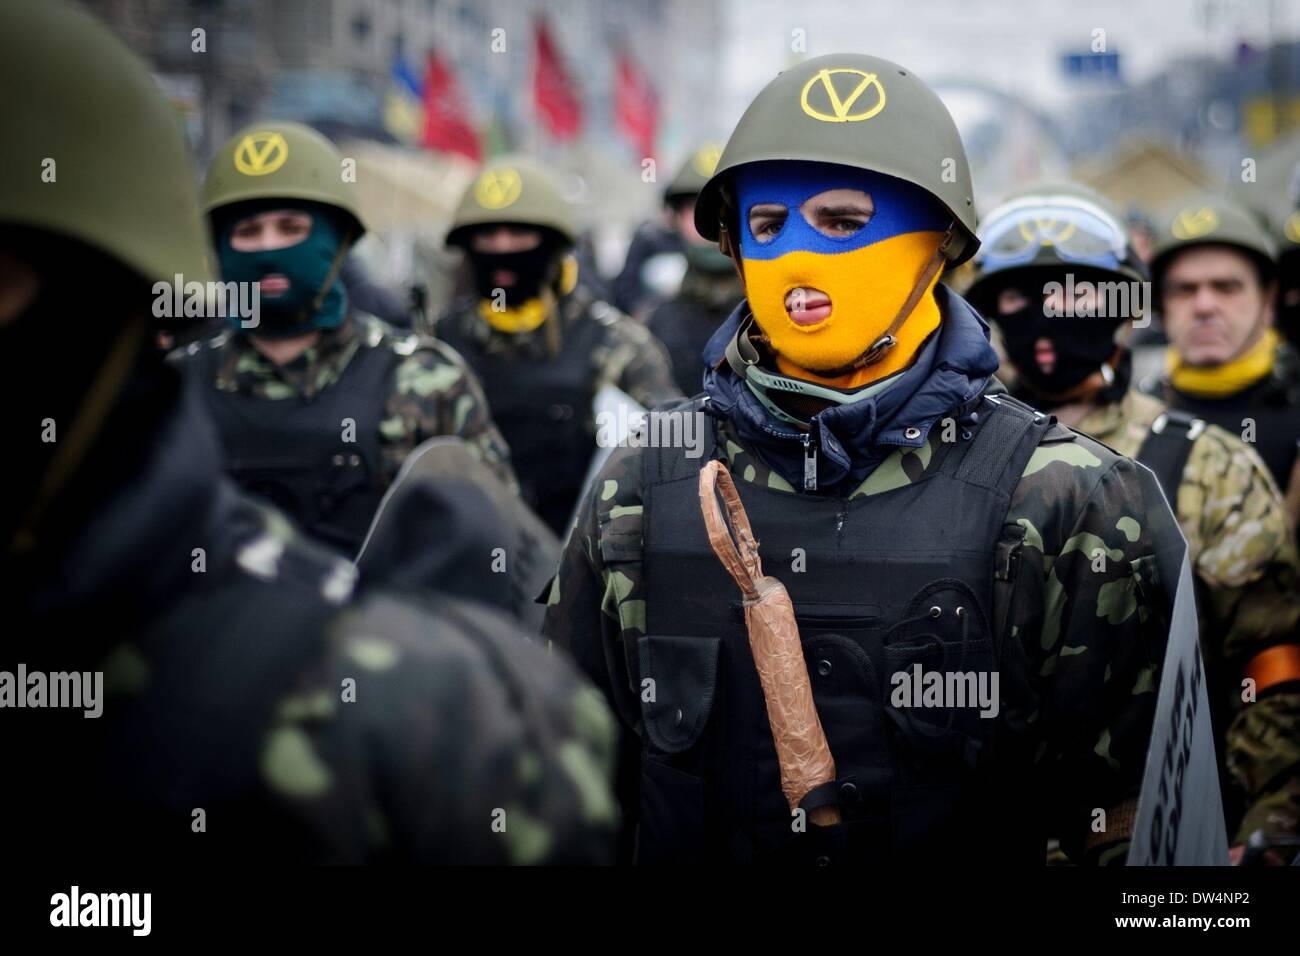 Anti goverment protesters are seen at the Maidan Place in Kiev (Ukraine), 13th February 2014. Stock Photo